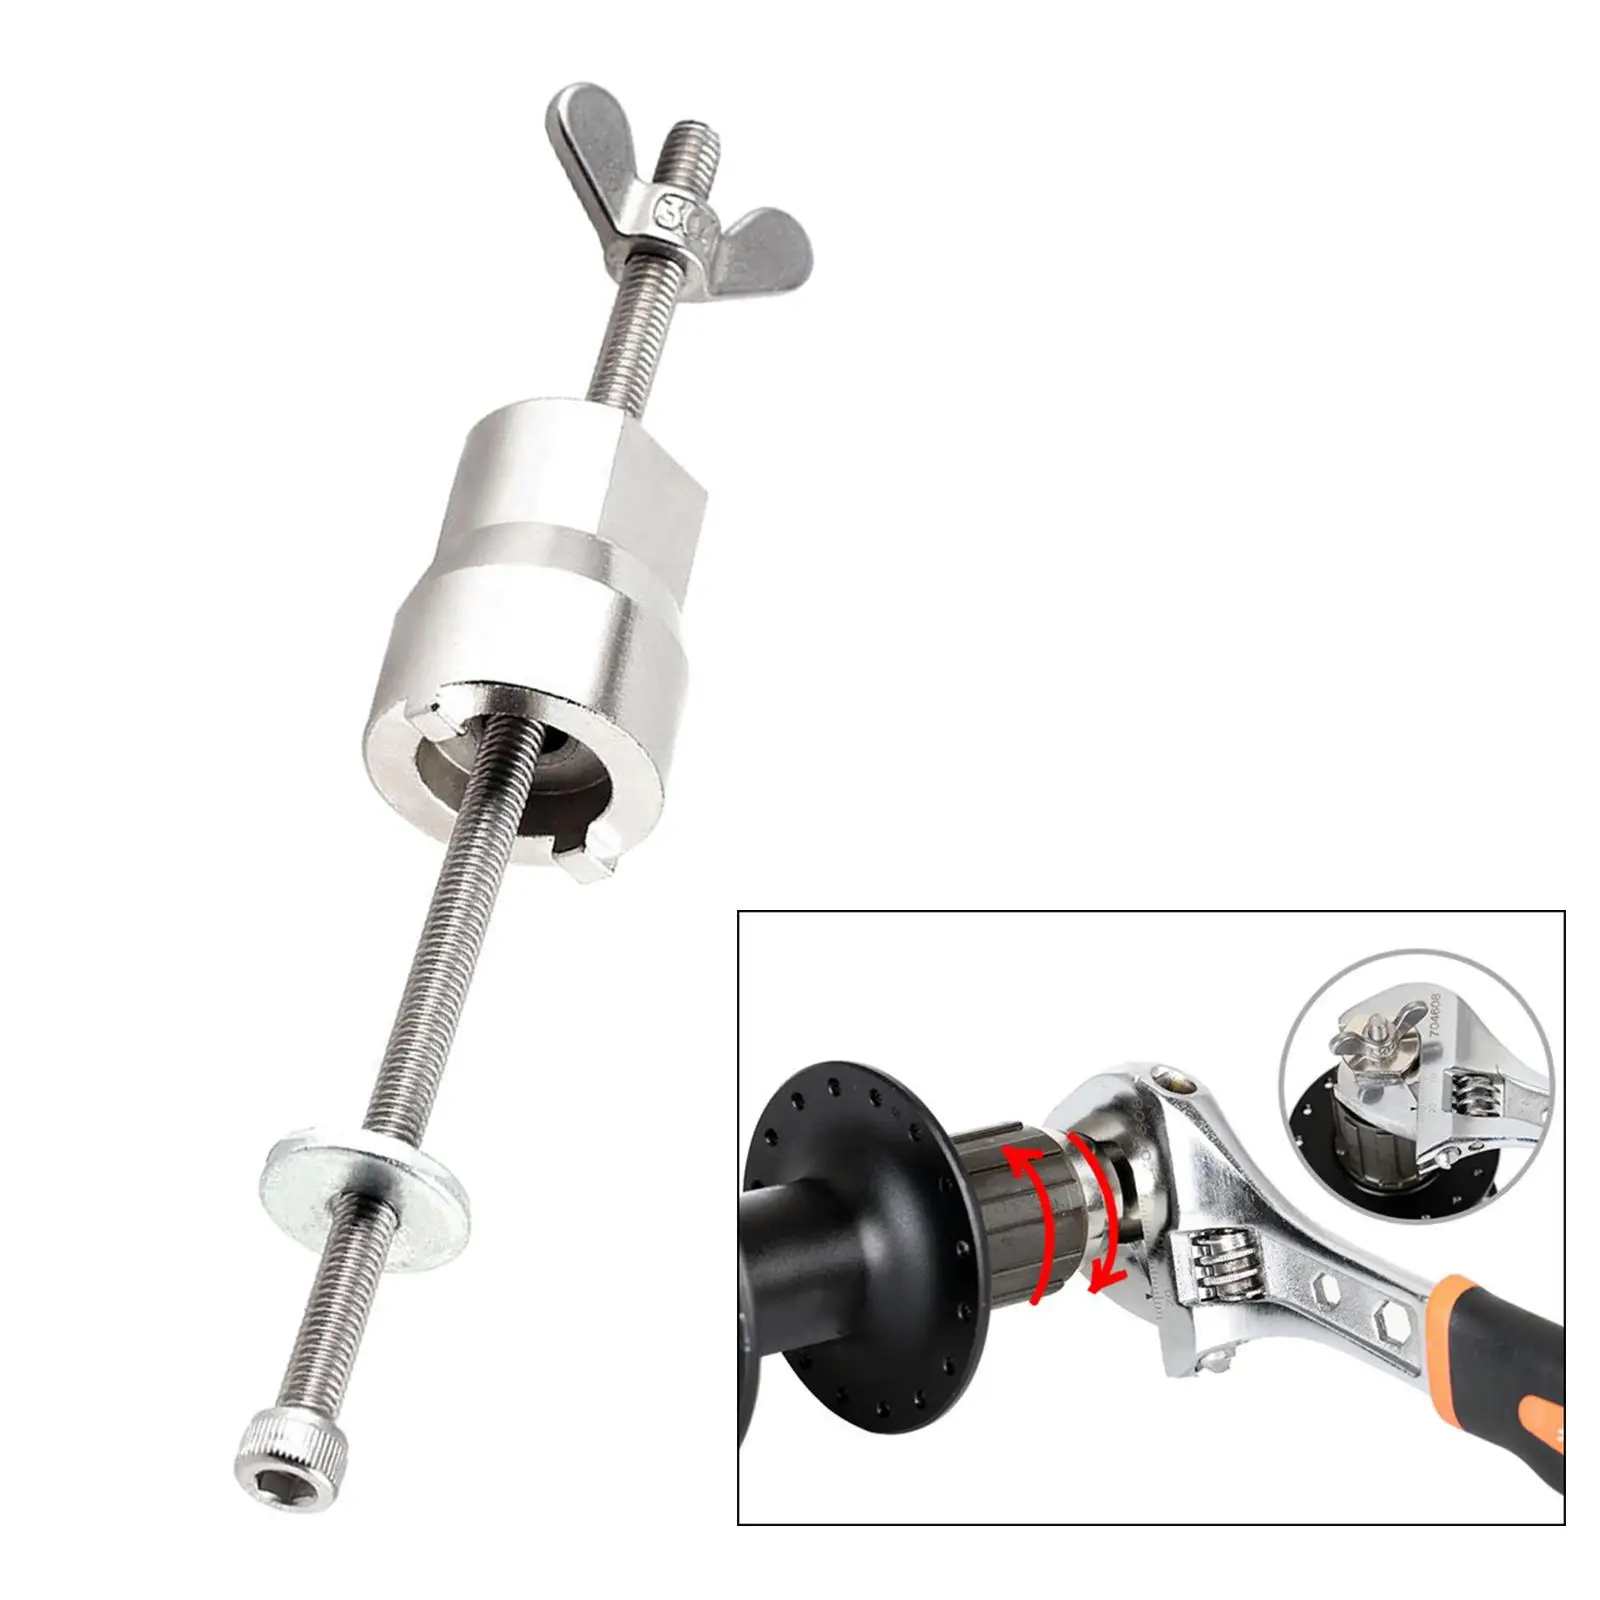 Professional Bike  Remover Removal Installer- won`t damage hub body, Cassette Hub Removal  Wrench